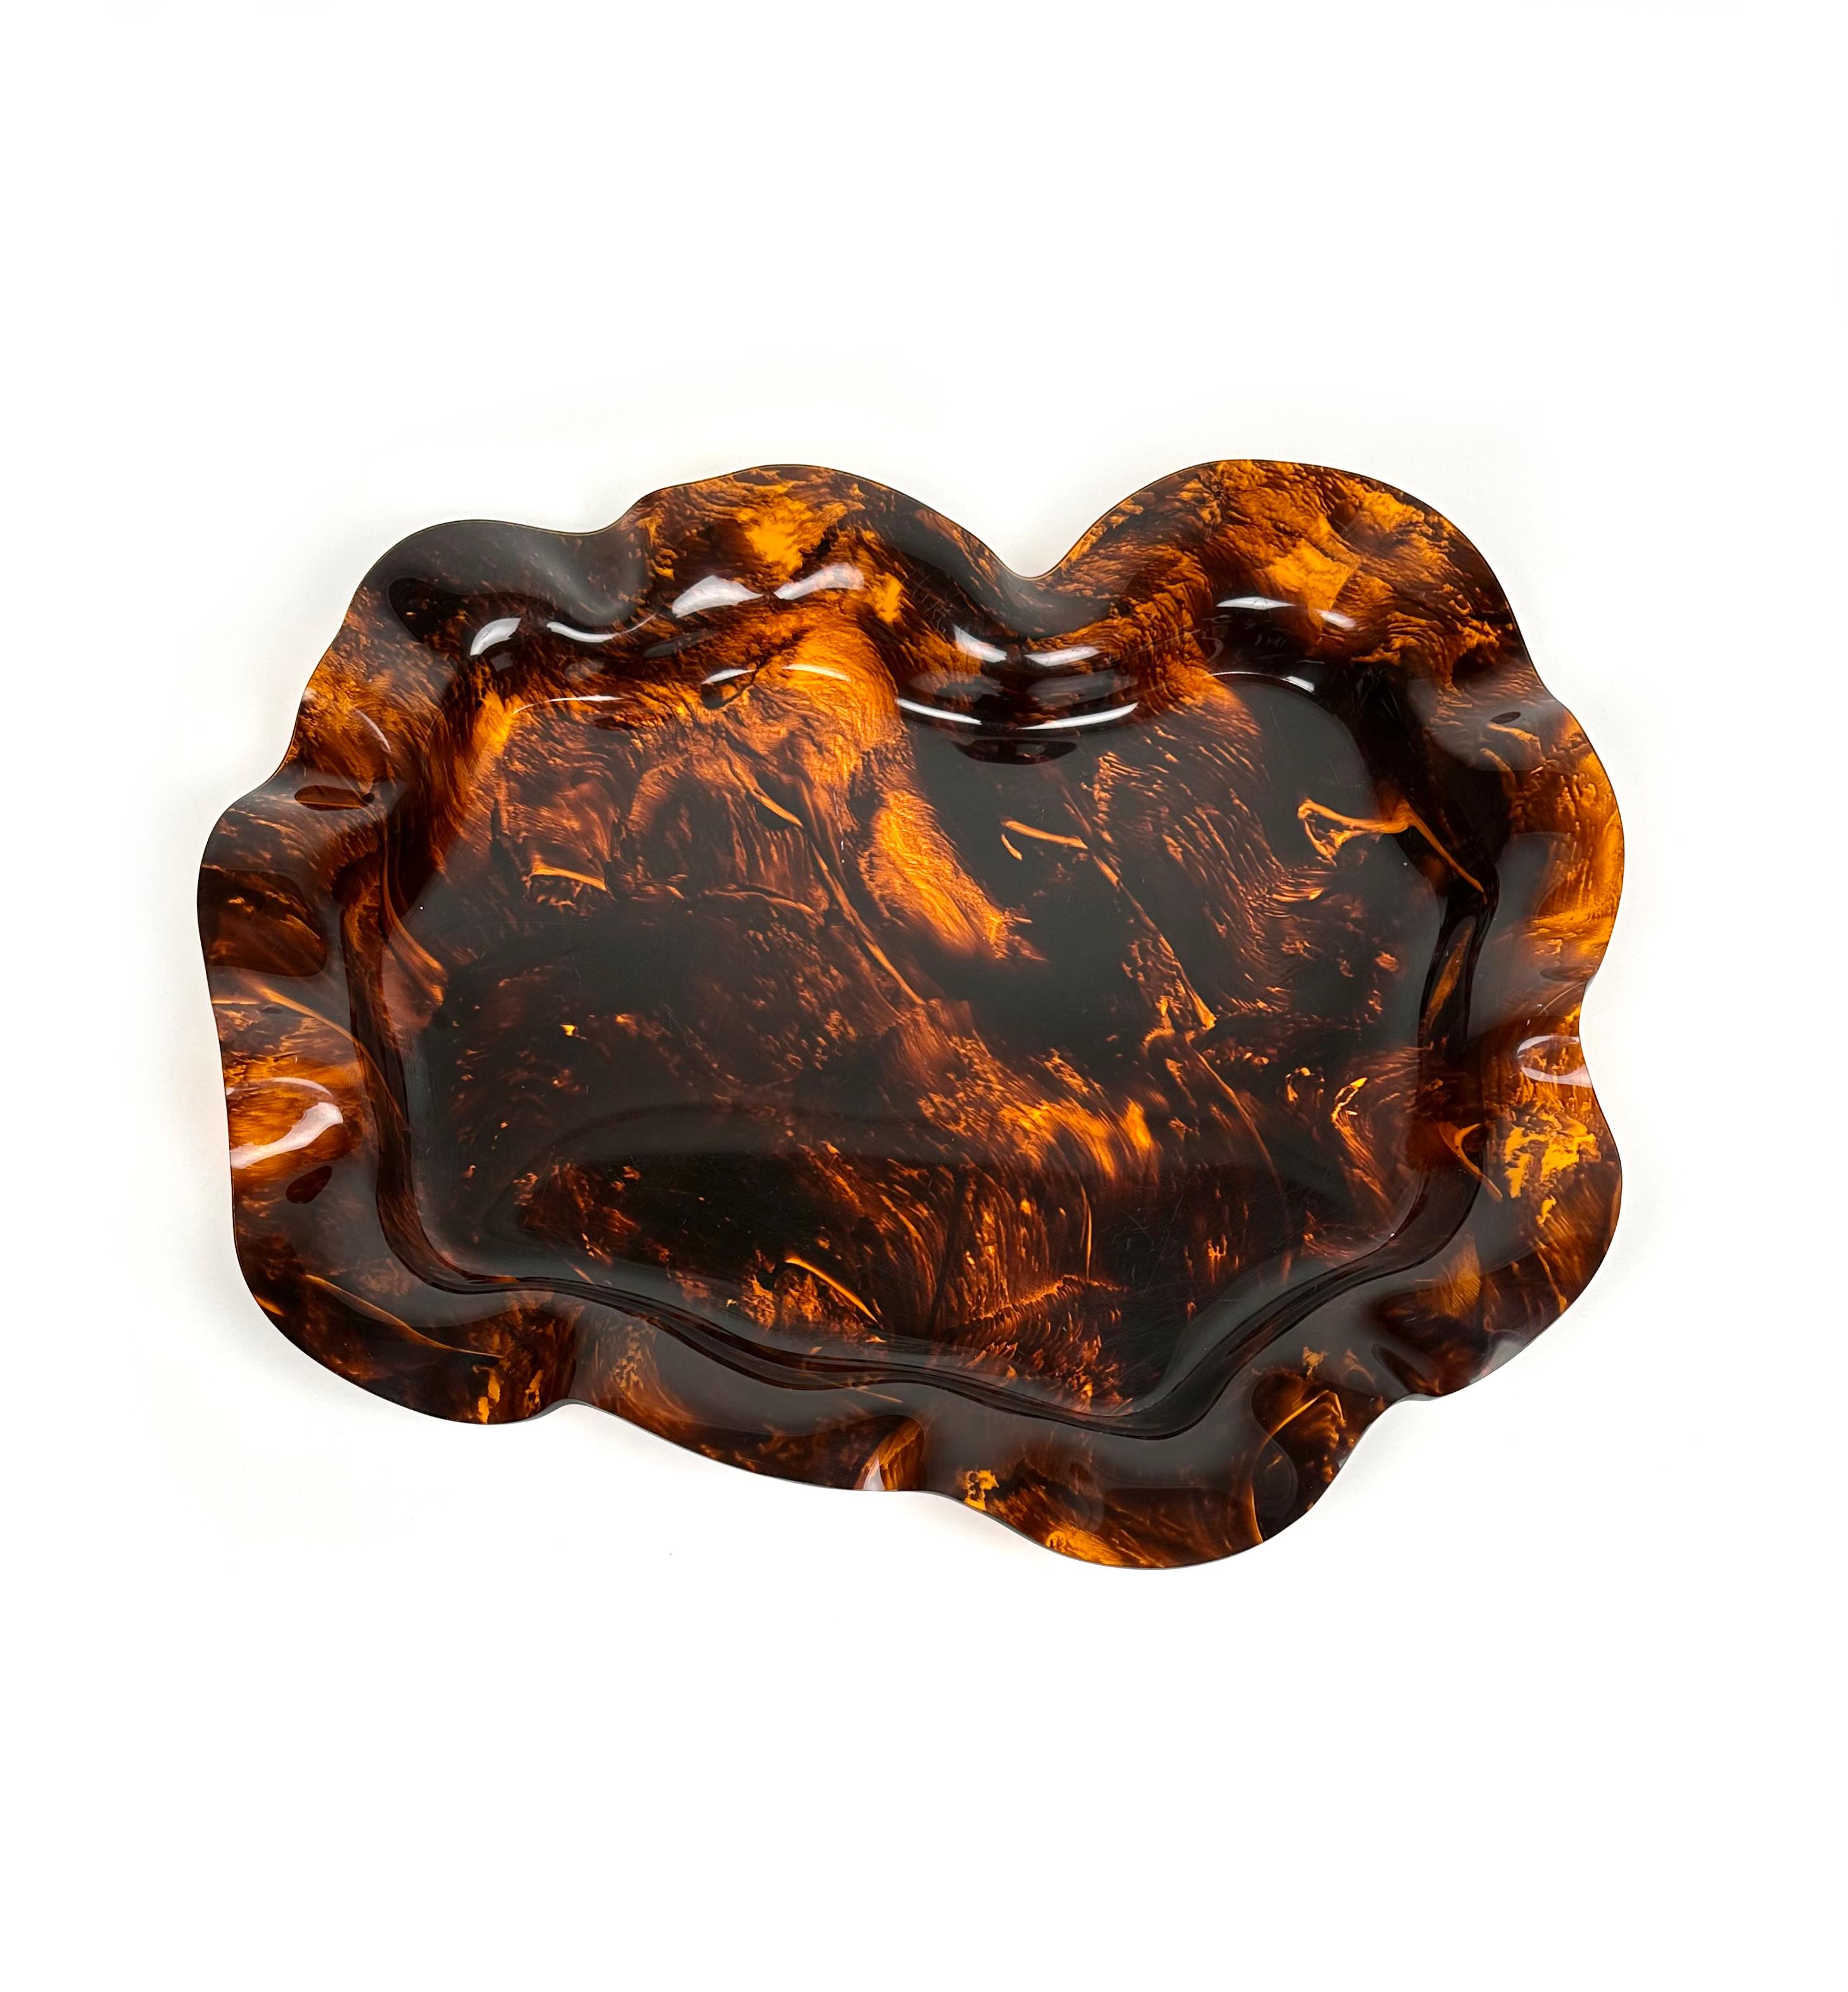 Acrylic Large Serving Tray or Centerpiece Lucite Faux Tortoiseshell, Italy 1970s